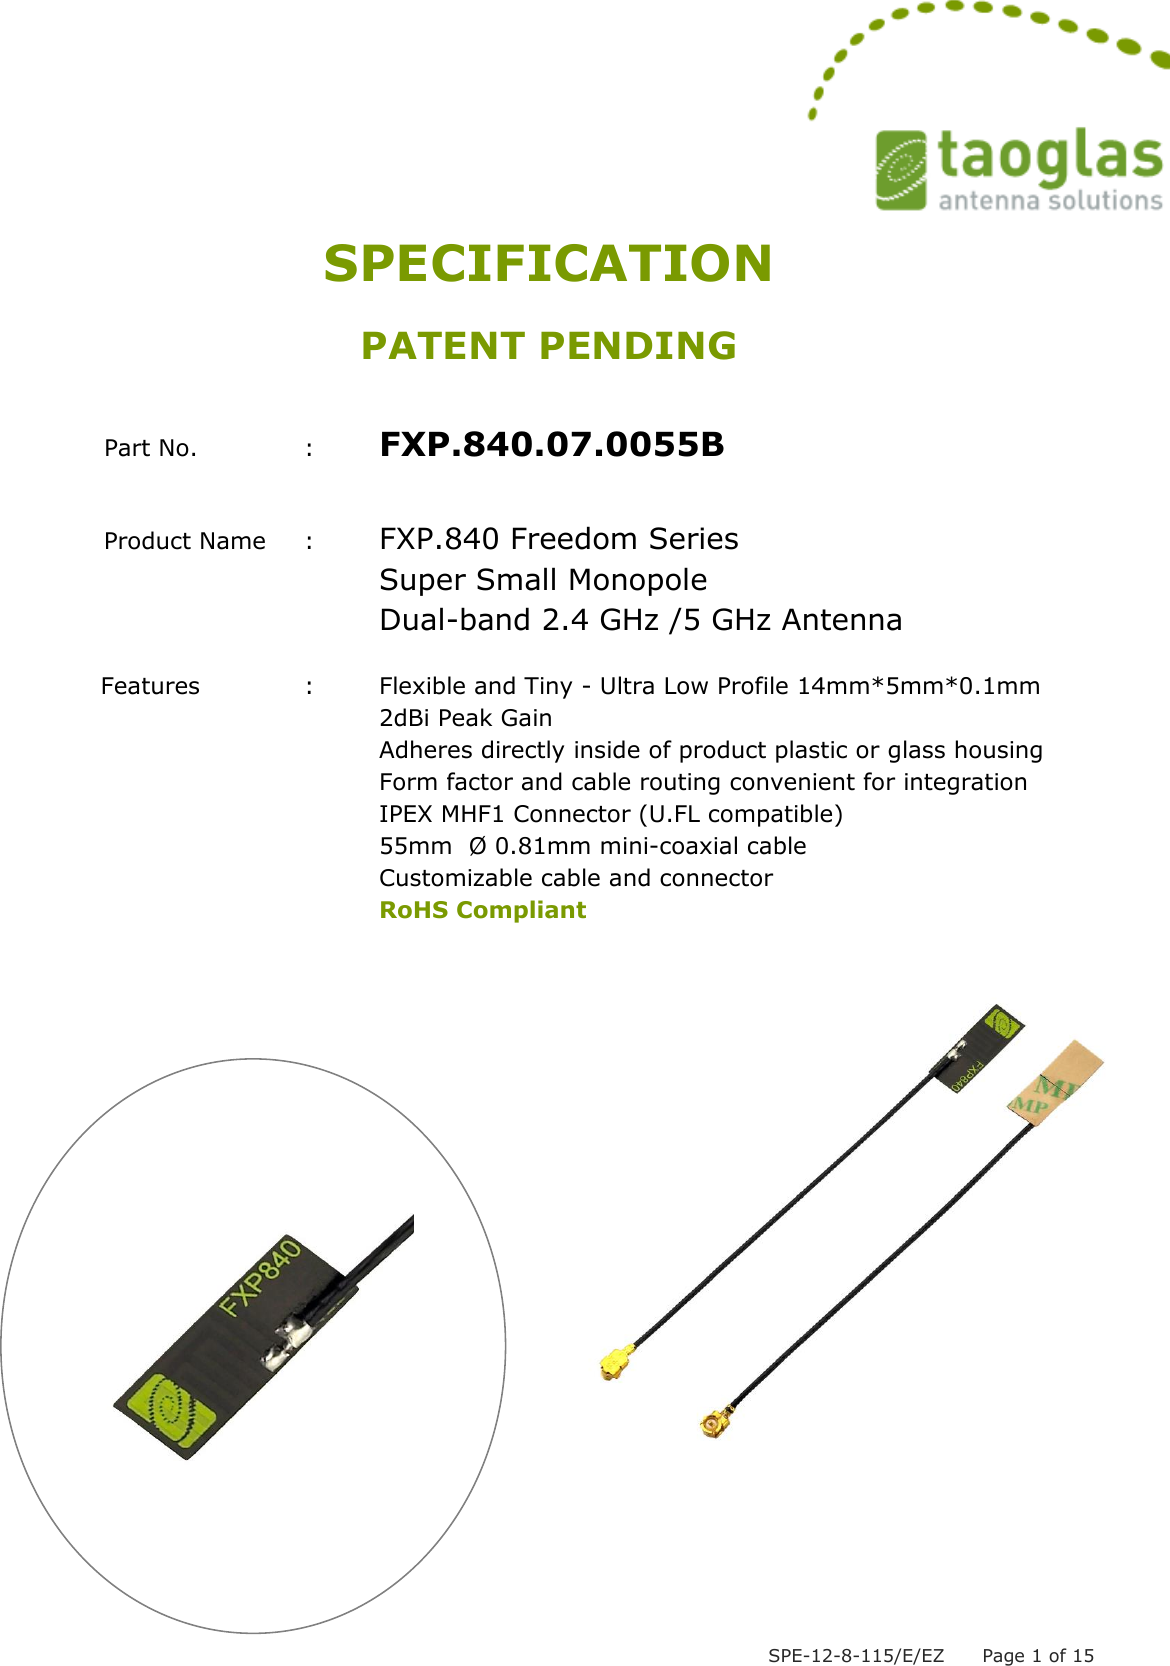  SPE-12-8-115/E/EZ      Page 1 of 15 SPECIFICATION PATENT PENDING  Part No.     :  FXP.840.07.0055B  Product Name  :  FXP.840 Freedom Series      Super Small Monopole     Dual-band 2.4 GHz /5 GHz Antenna                                                     Features        :  Flexible and Tiny - Ultra Low Profile 14mm*5mm*0.1mm           2dBi Peak Gain Adheres directly inside of product plastic or glass housing Form factor and cable routing convenient for integration IPEX MHF1 Connector (U.FL compatible) 55mm  Ø 0.81mm mini-coaxial cable   Customizable cable and connector RoHS Compliant               